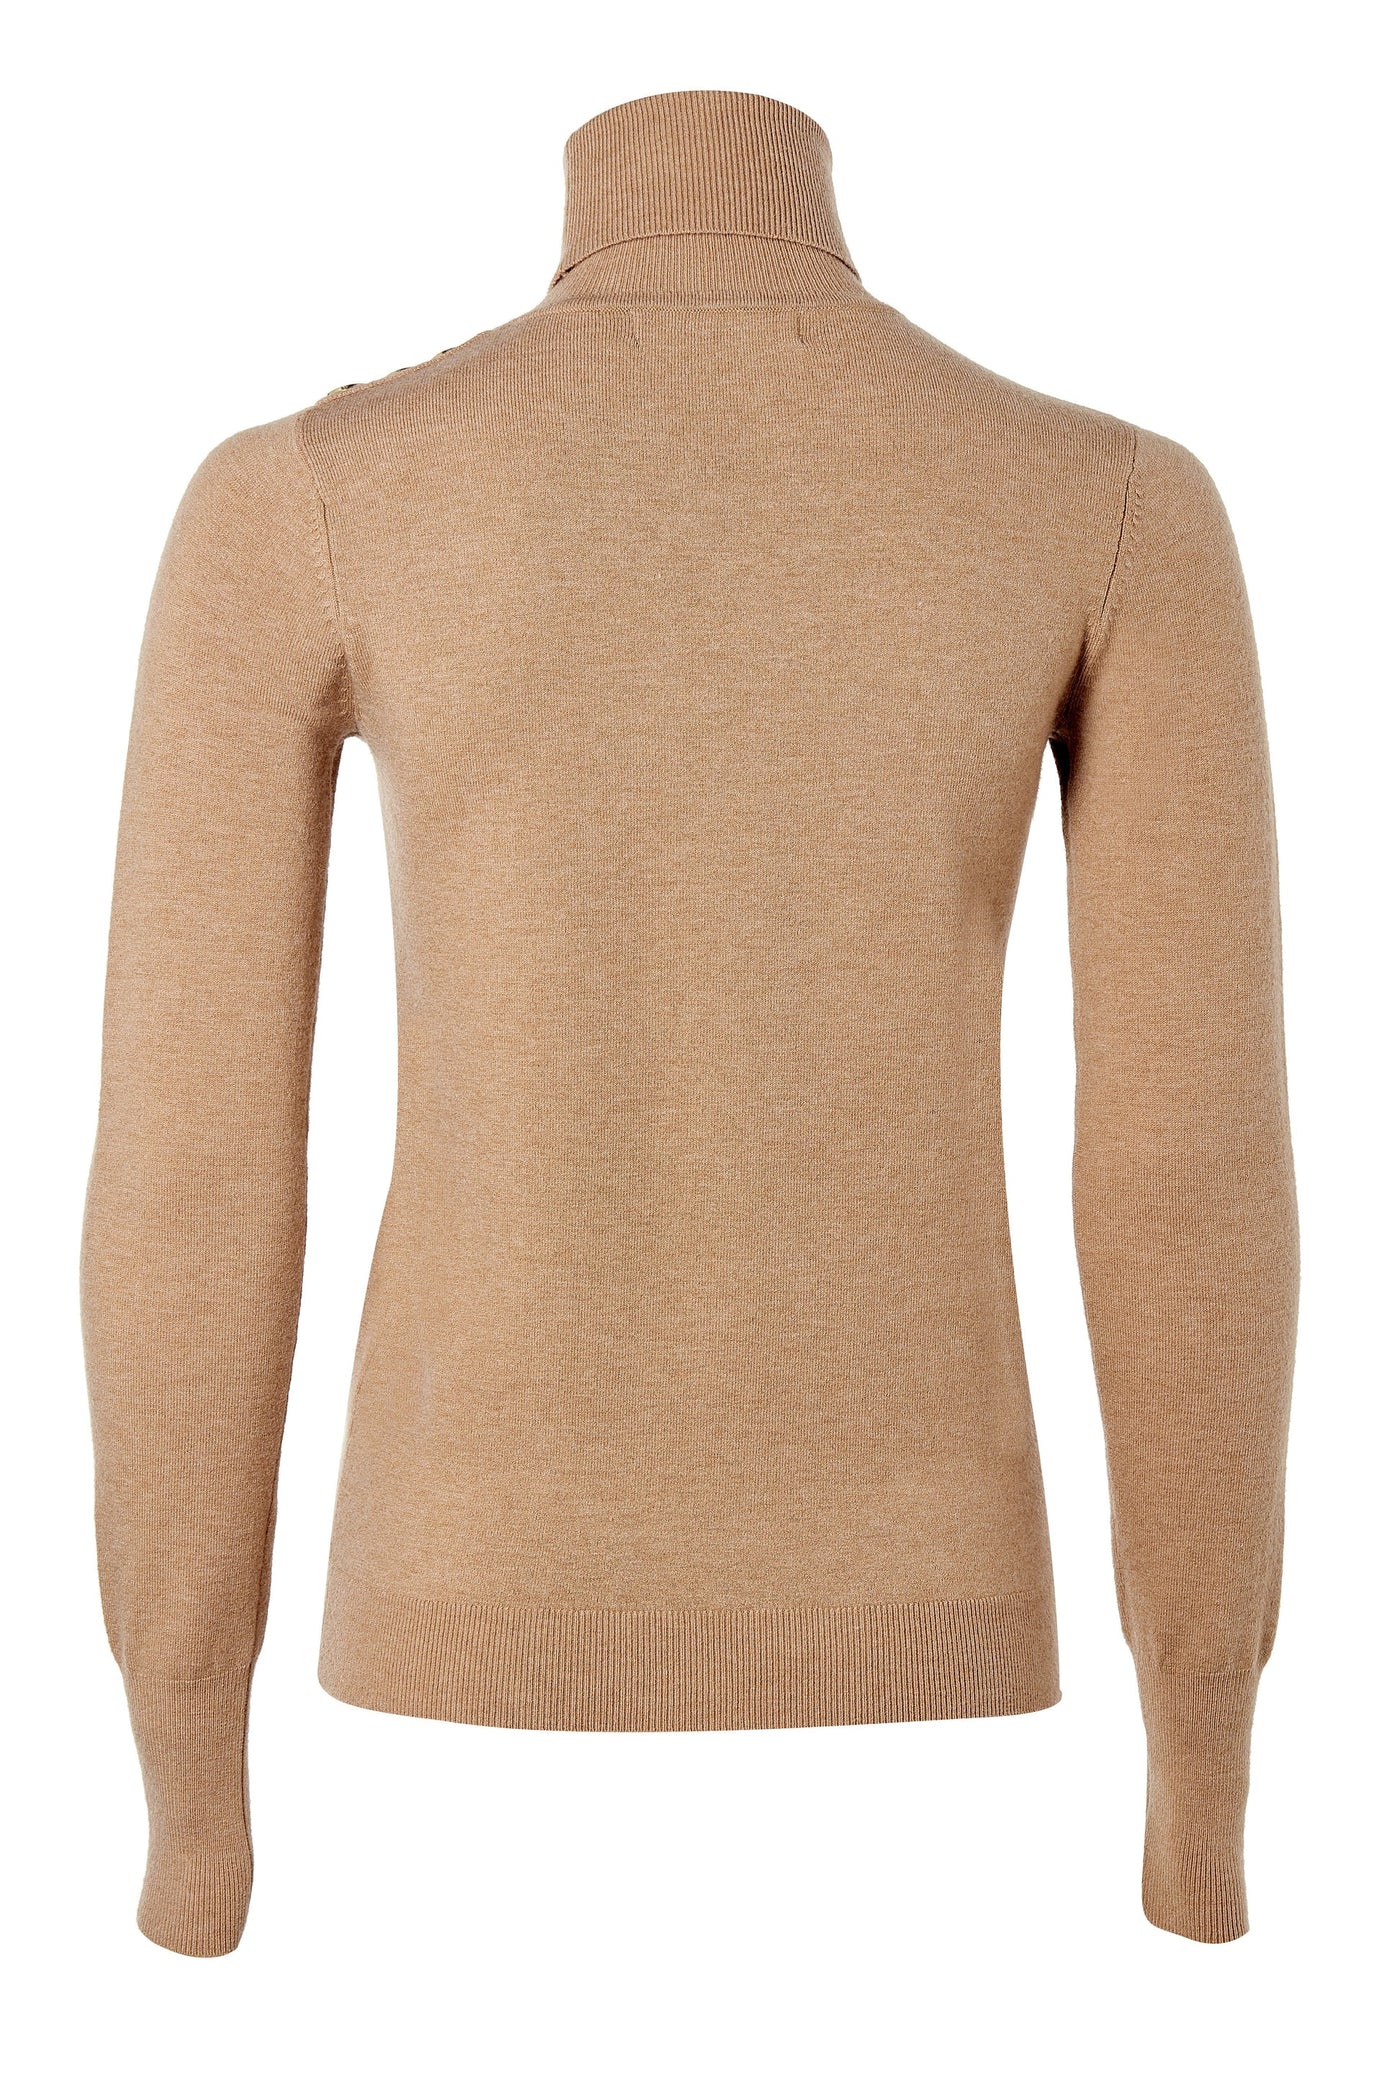 Holland Cooper Buttoned Knit Roll Neck Ladies Knitwear in Dark Camel